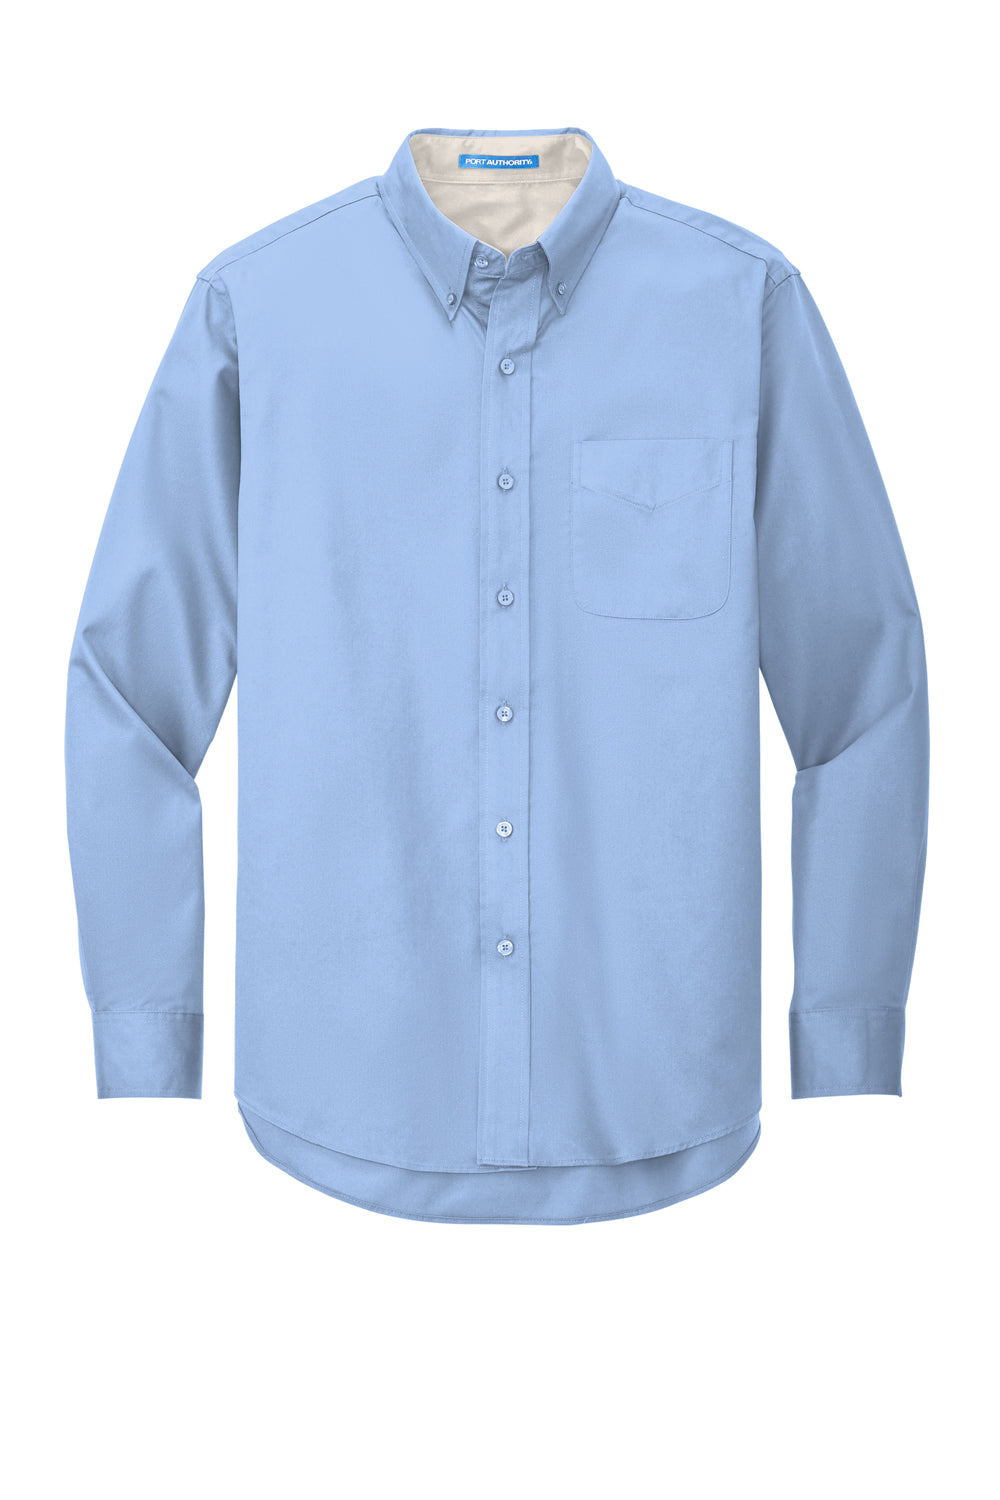 Port Authority S608/TLS608/S608ES Mens Easy Care Wrinkle Resistant Long Sleeve Button Down Shirt w/ Pocket Light Blue Flat Front